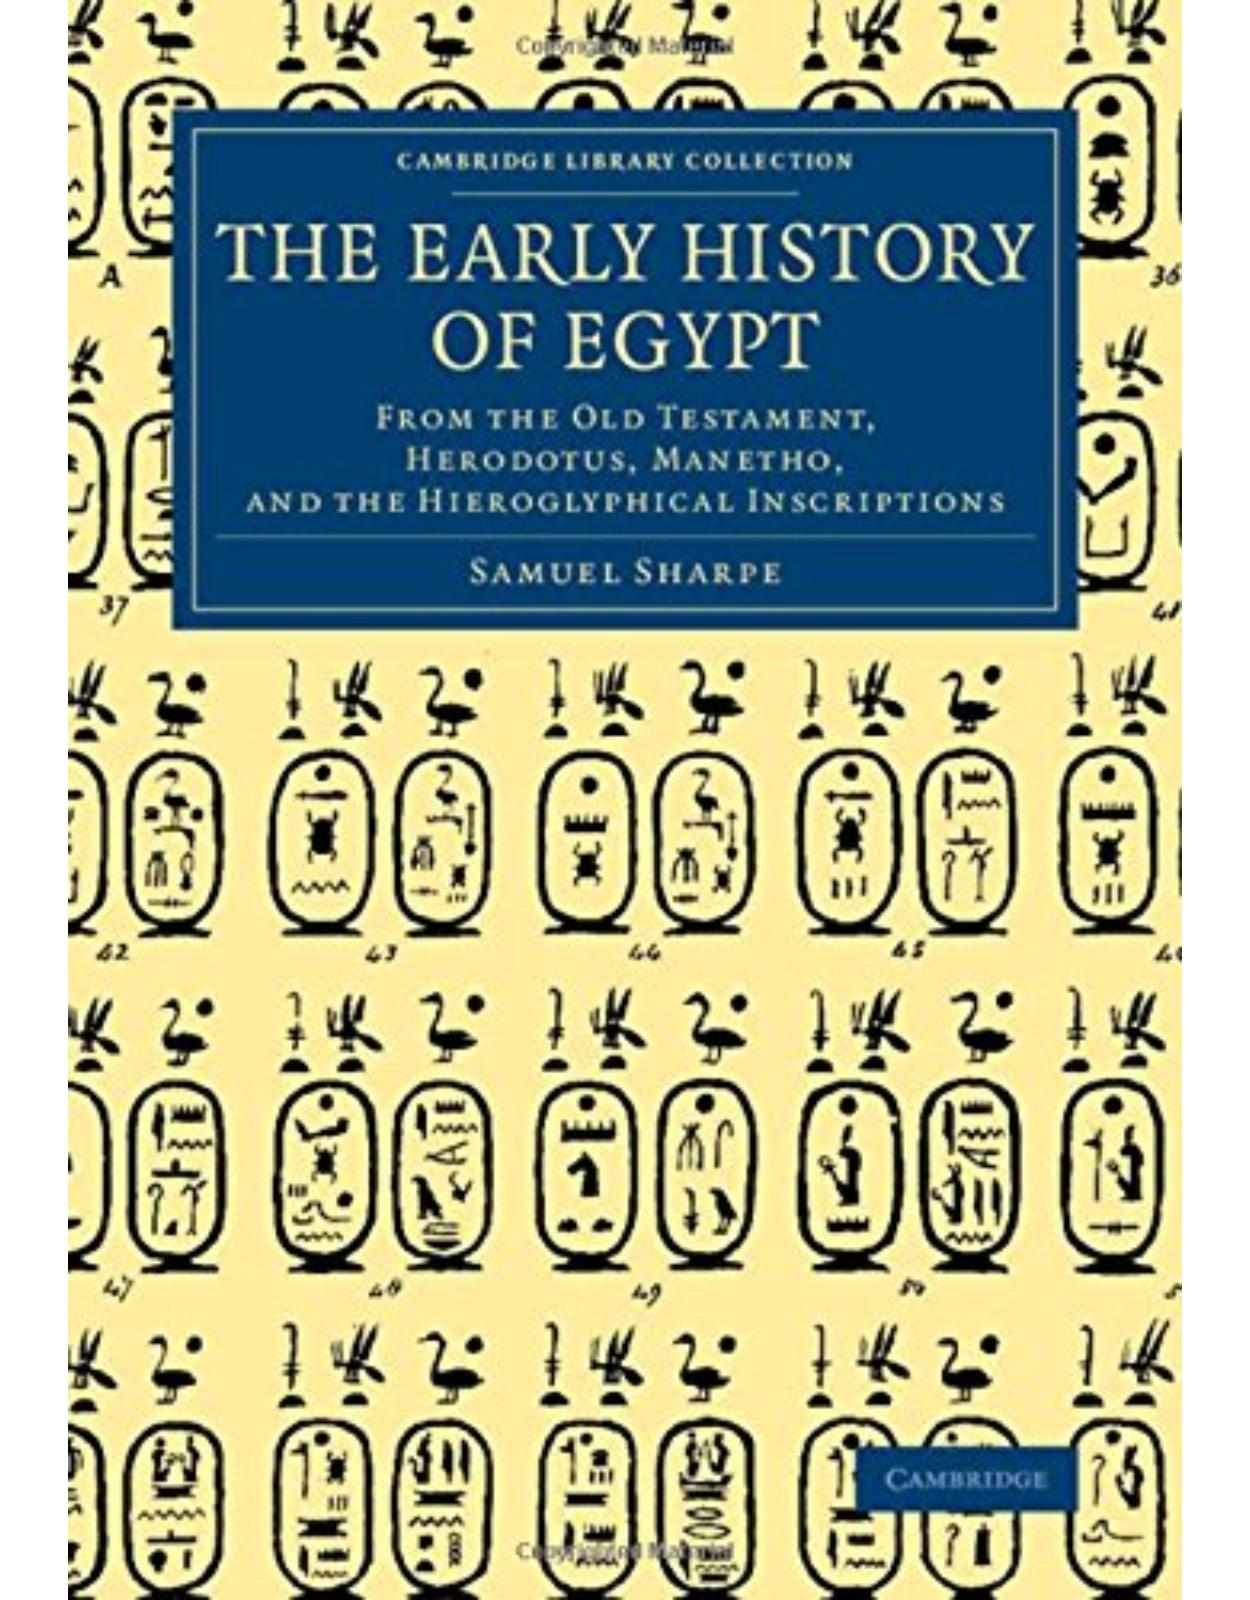 The Early History of Egypt: From the Old Testament, Herodotus, Manetho, and the Hieroglyphical Inscriptions (Cambridge Library Collection - Egyptology) 